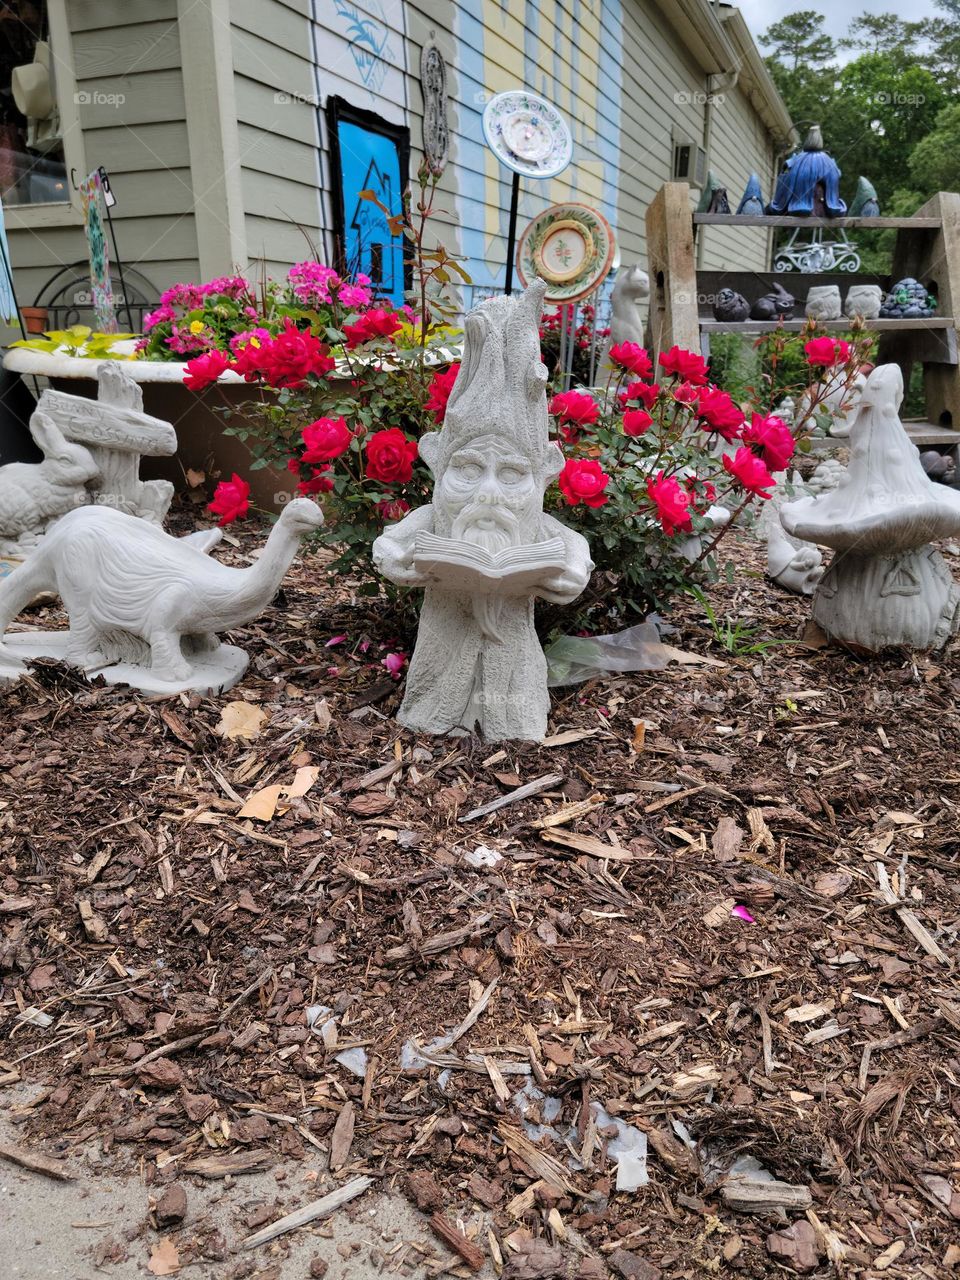 Flowers and gnomes